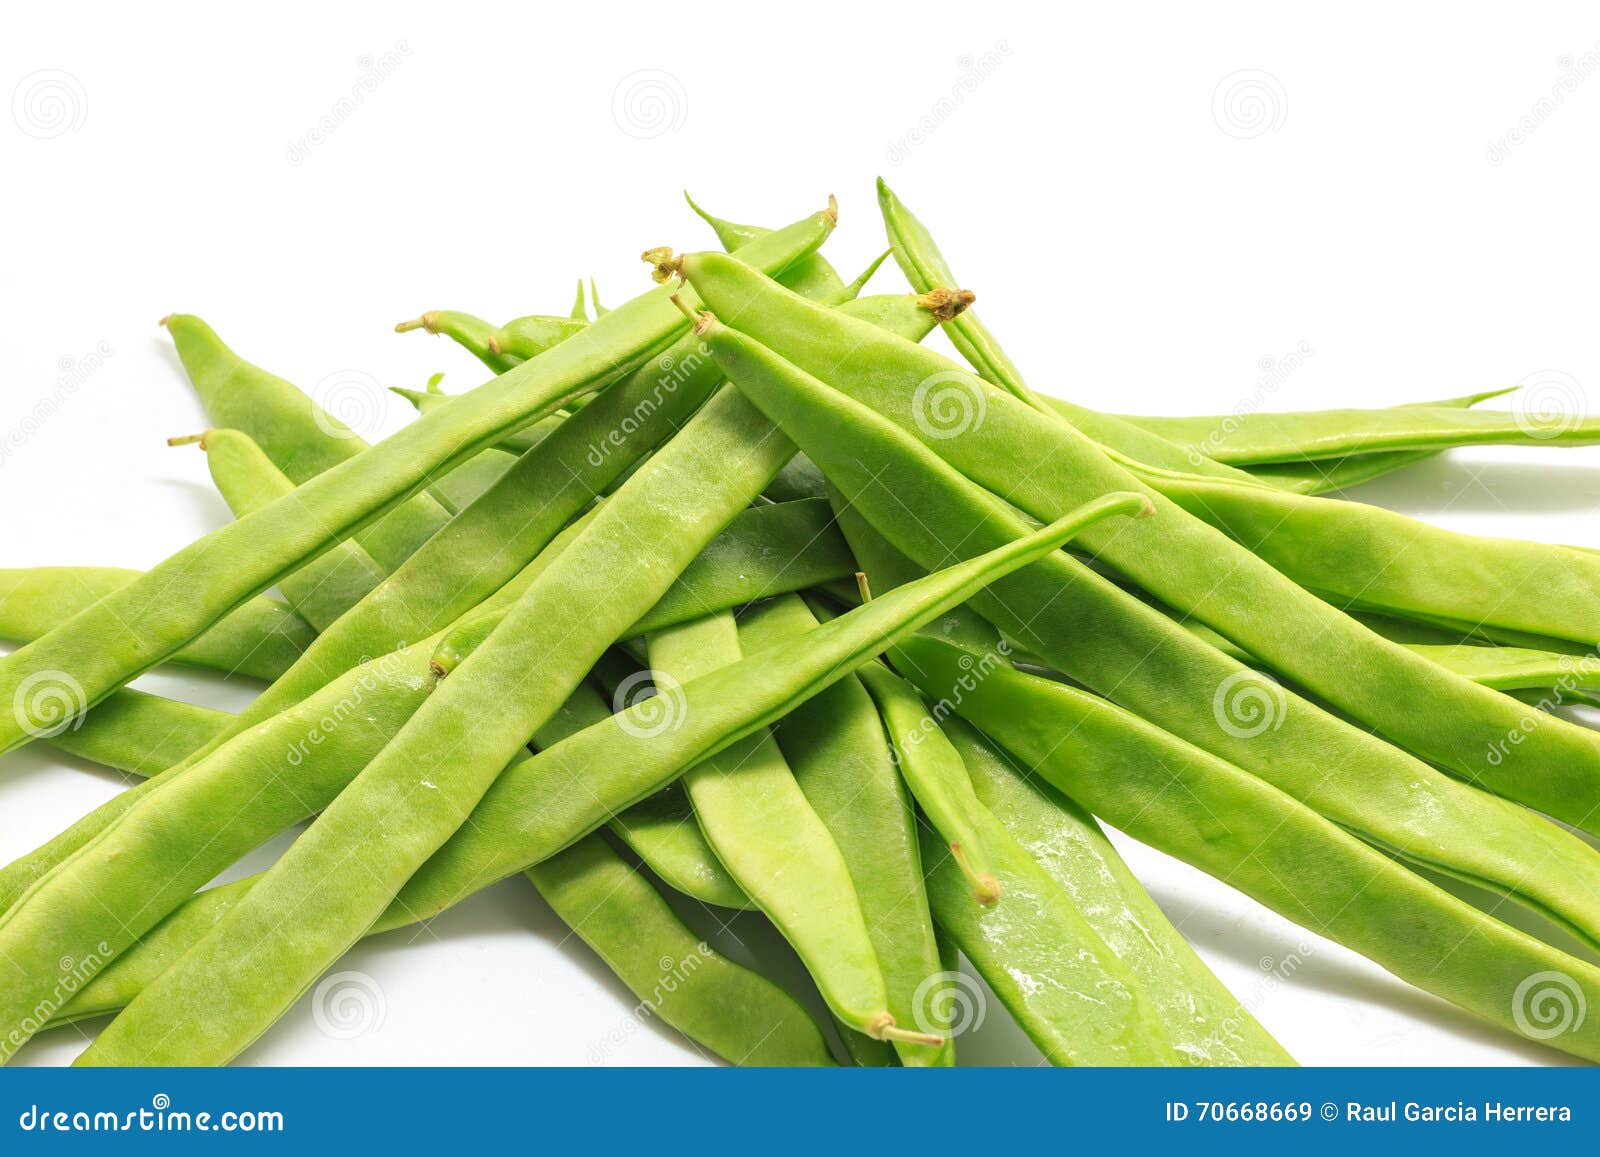 pile of italian flat green beans on a white background